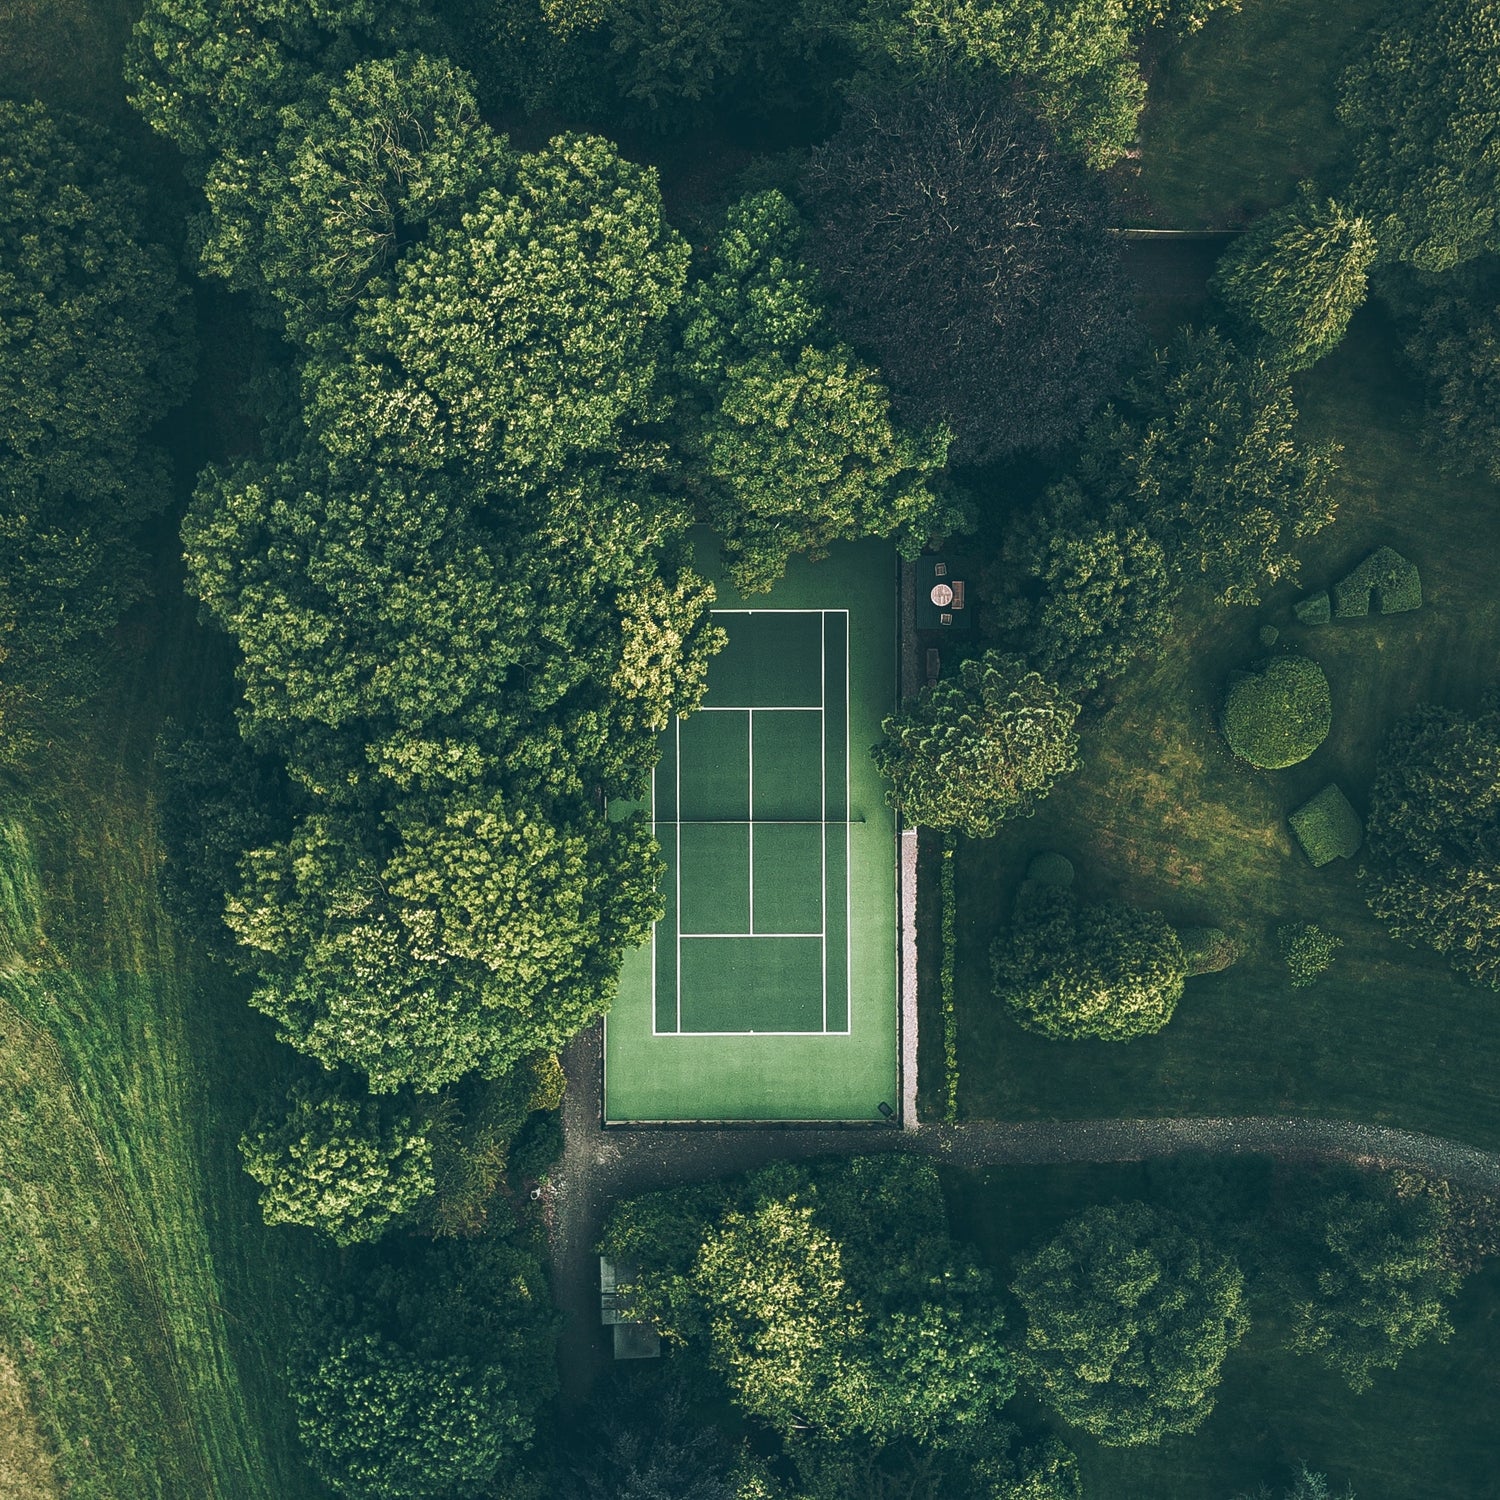 Pack Your Racket - These Hotels Have Tennis Courts